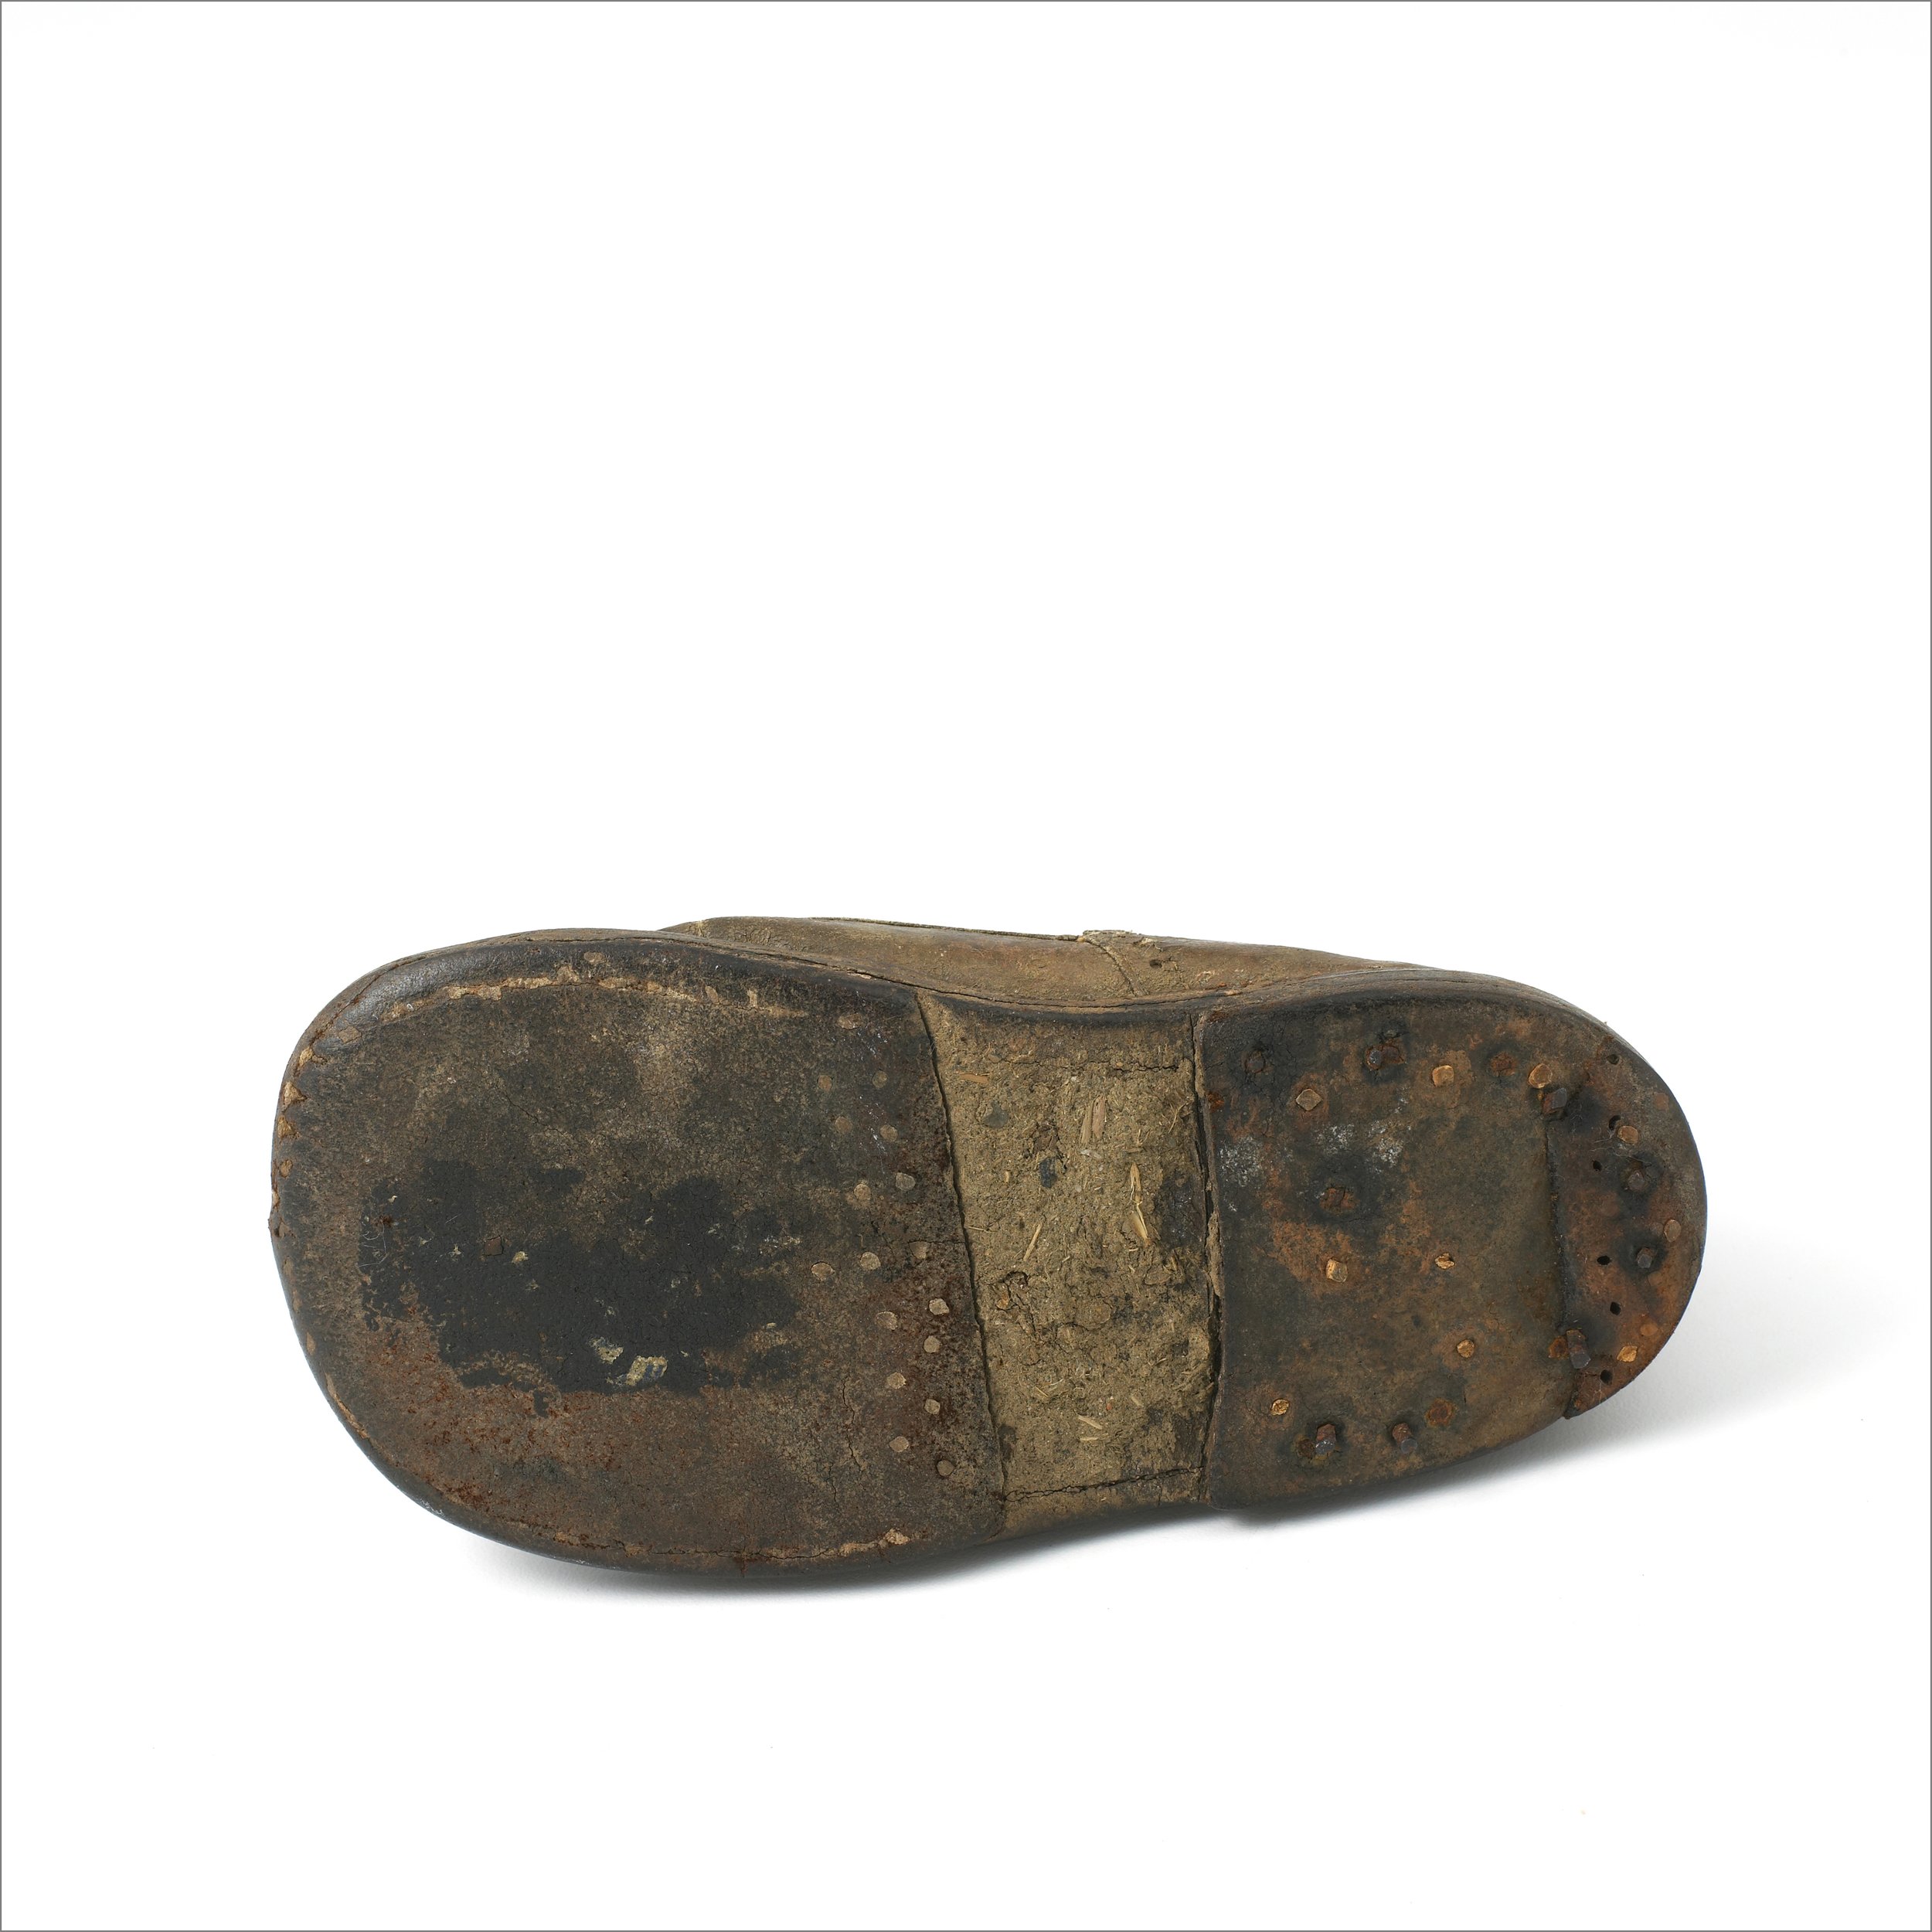 Child’s Shoe found in a Nazi concentration camp